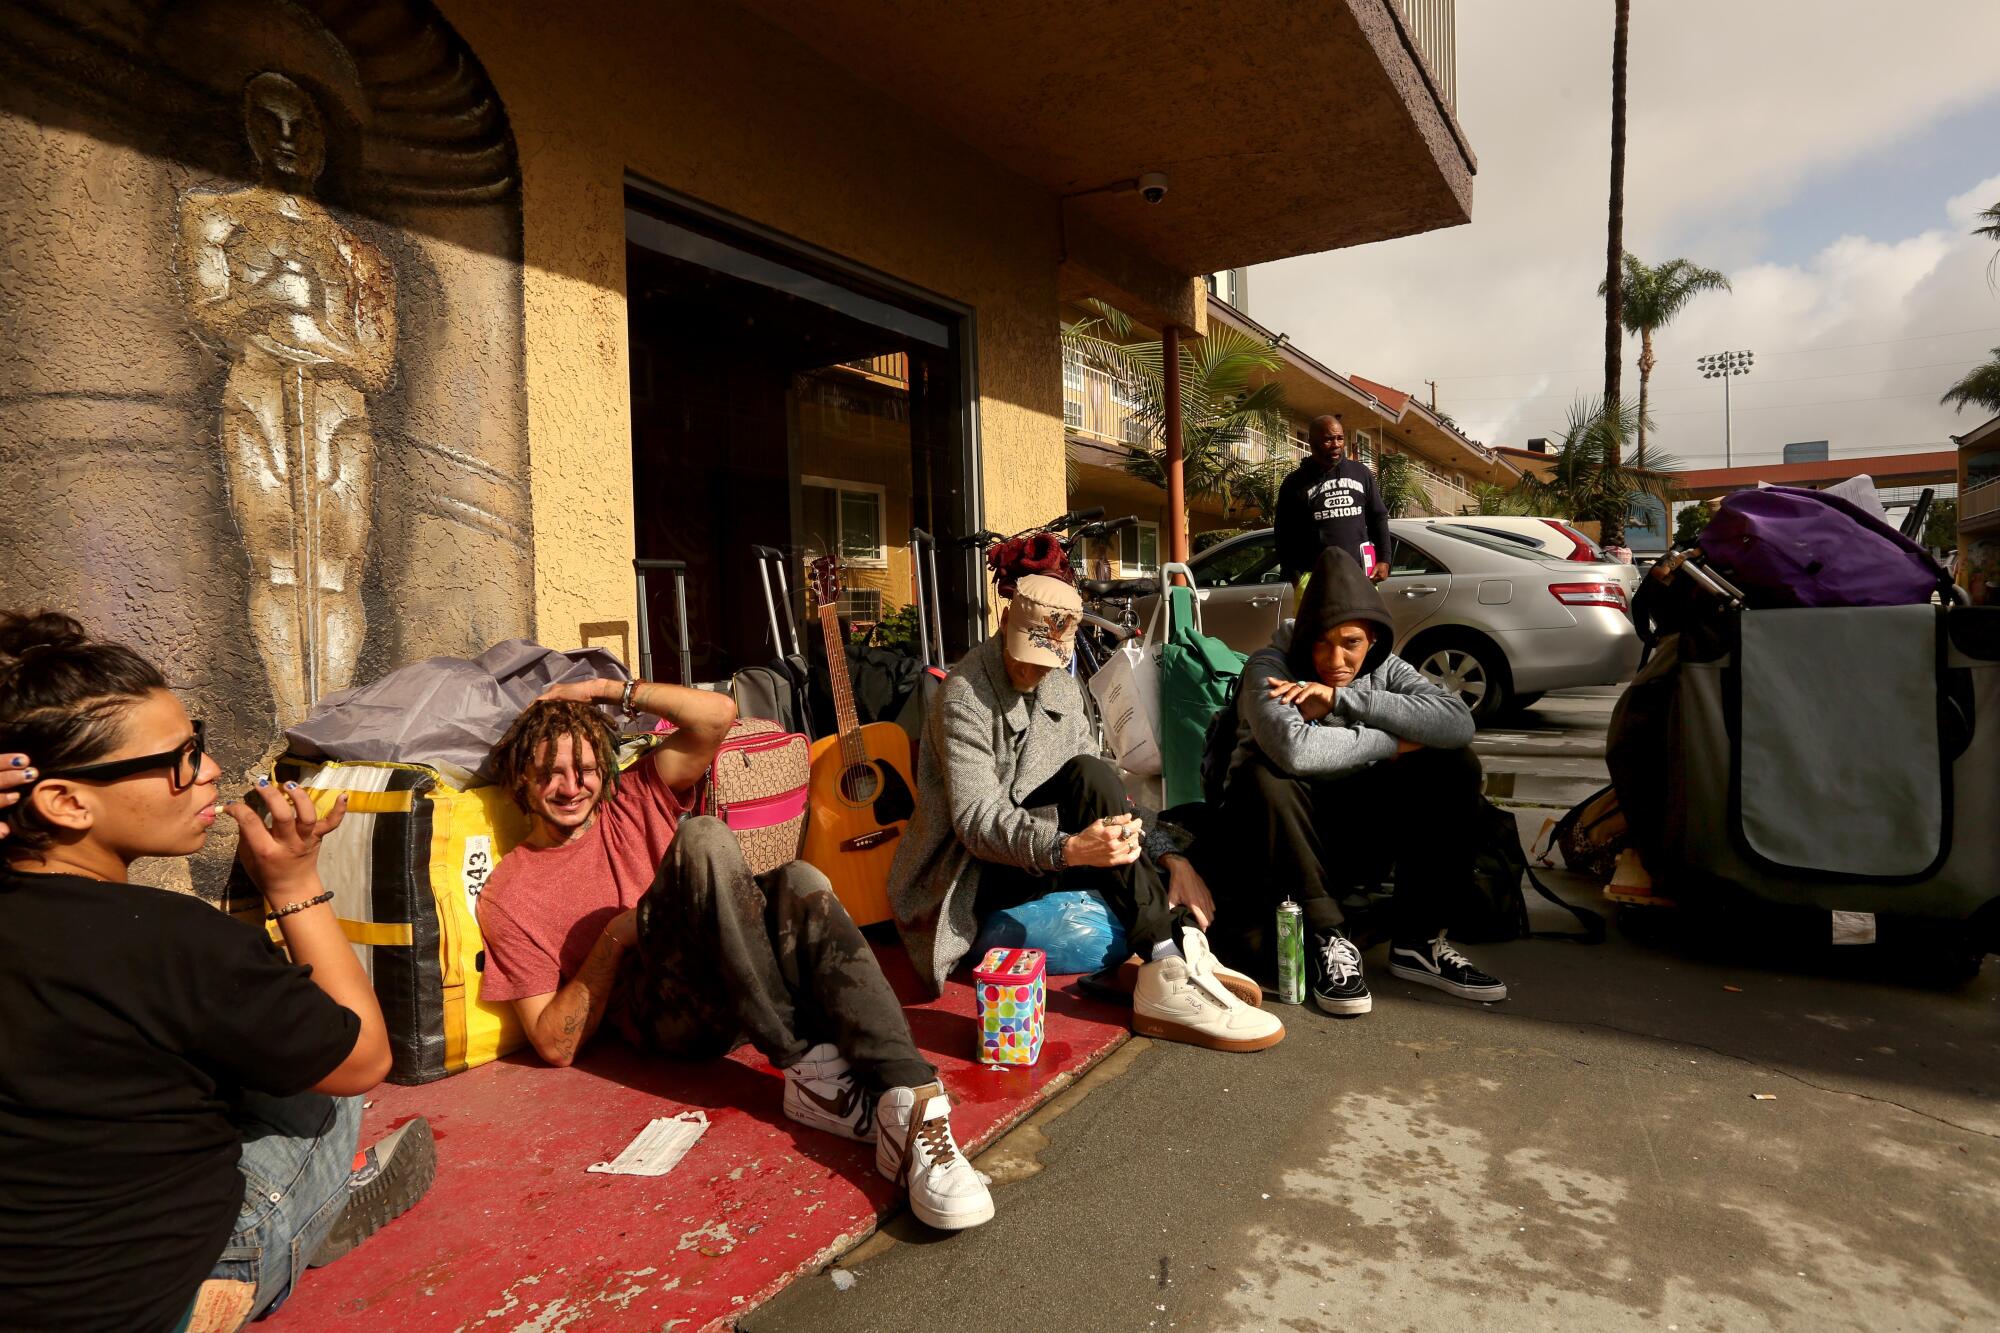 People sit on the ground outside a building with their belongings